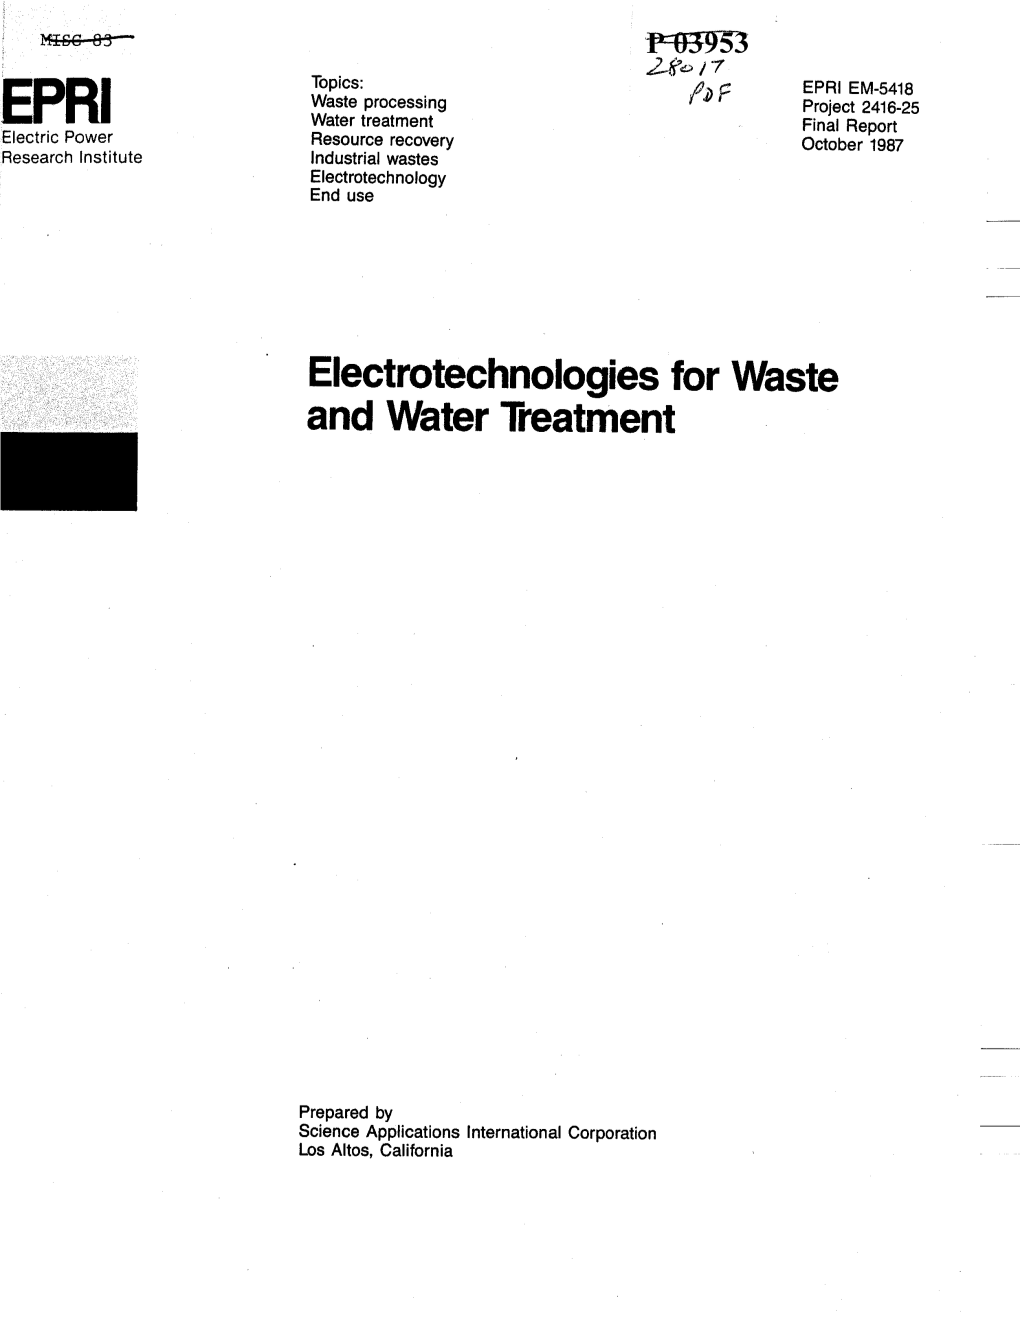 Electrotechnologies for Waste and Water Treatment